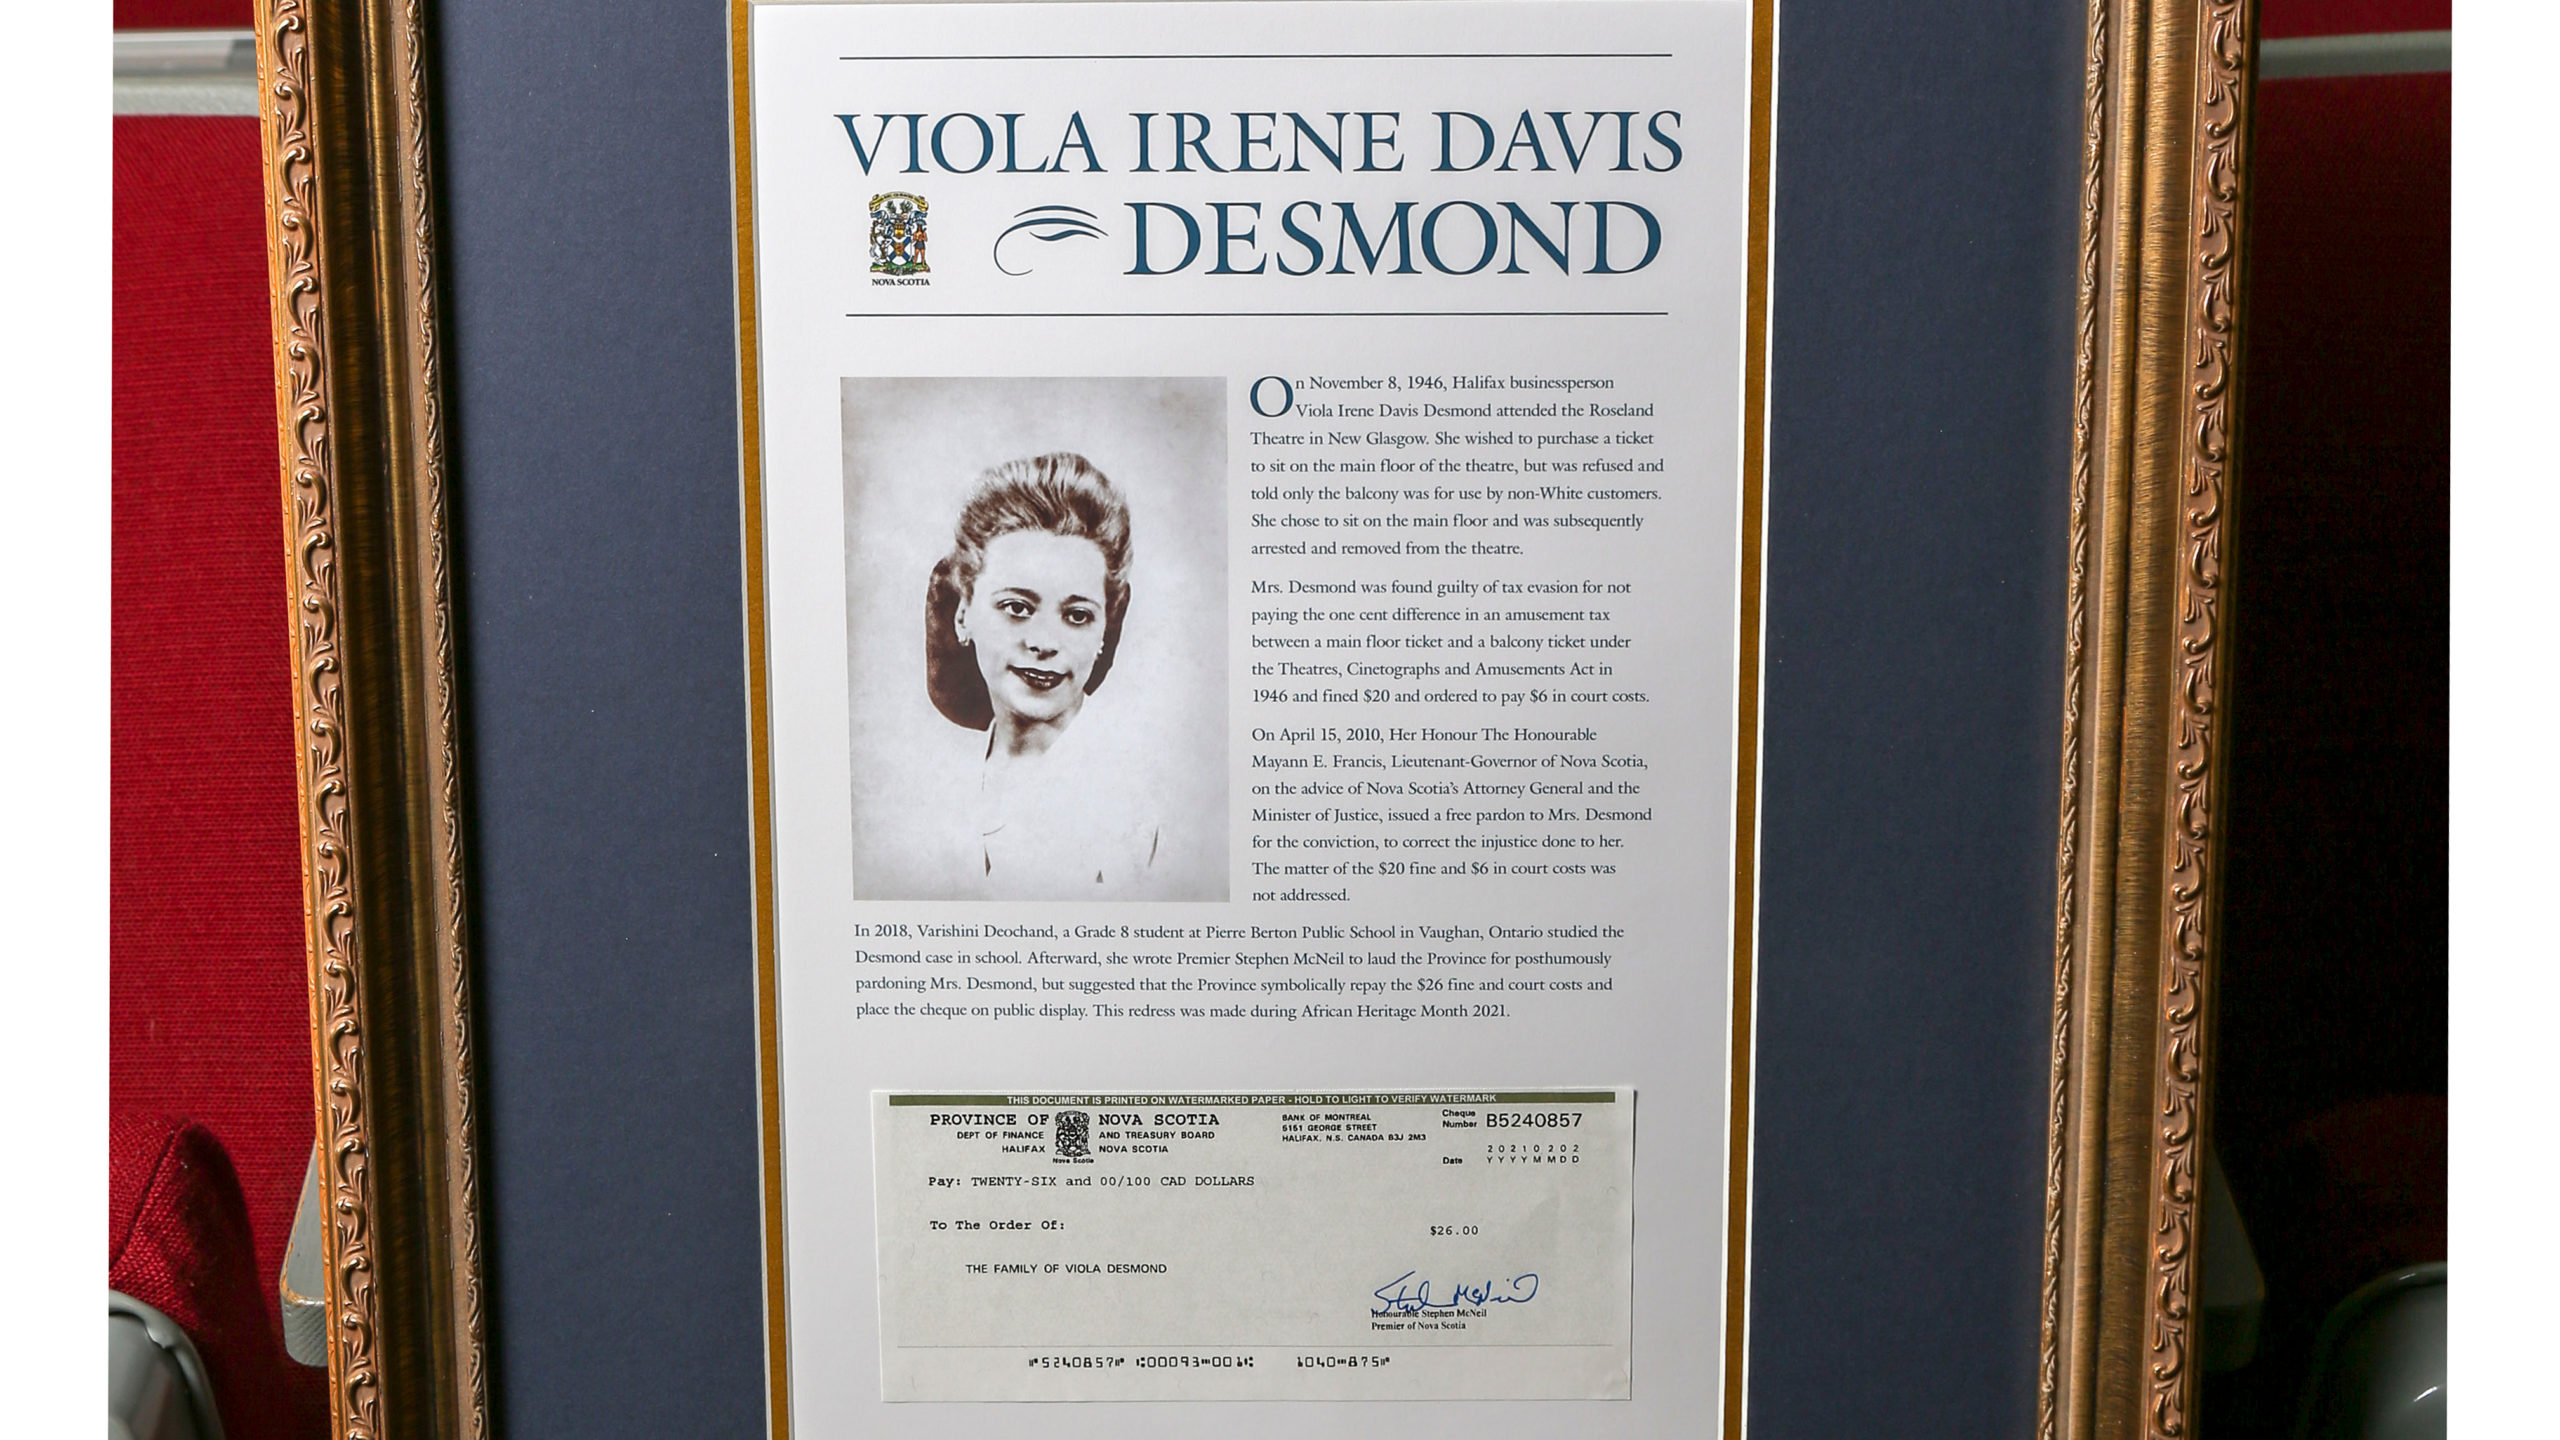 A framed copy of the official repayment cheque issued to the family of Viola Desmond is displayed alongside her pardon certificate.